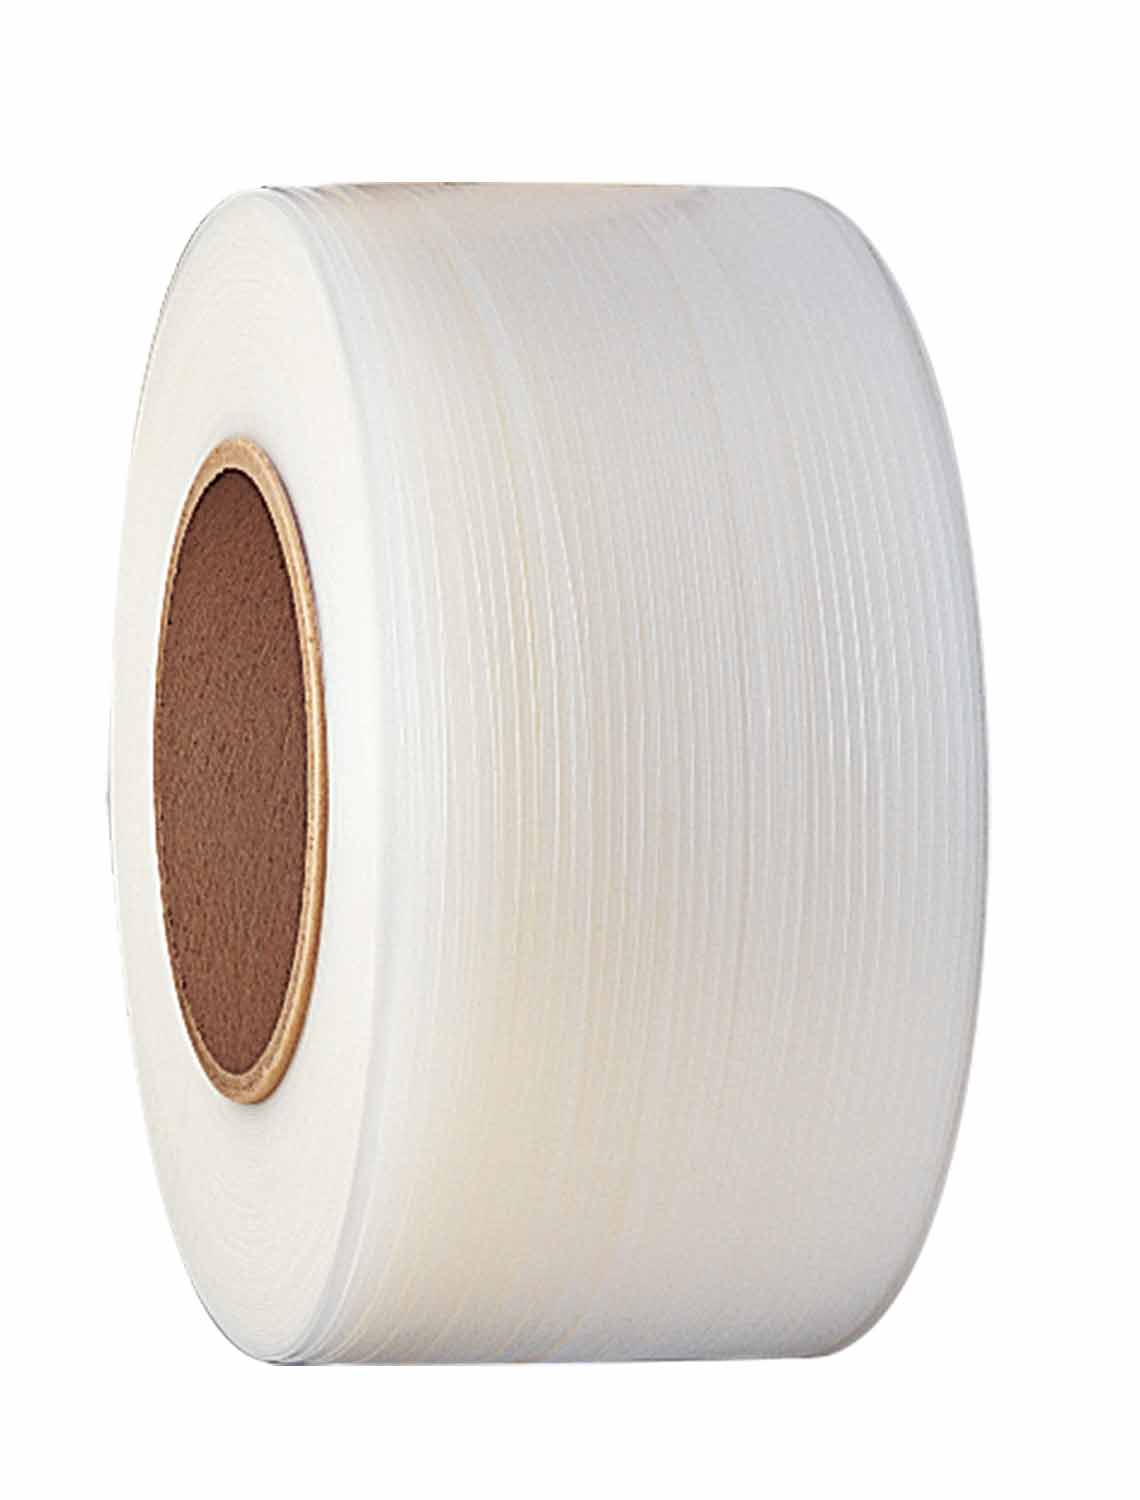 PLASTIC STRAPPING CLEAR 3/8&quot;
300 LB. 8X8 POLYPROPYLENE
SIGNODE CONTRAX